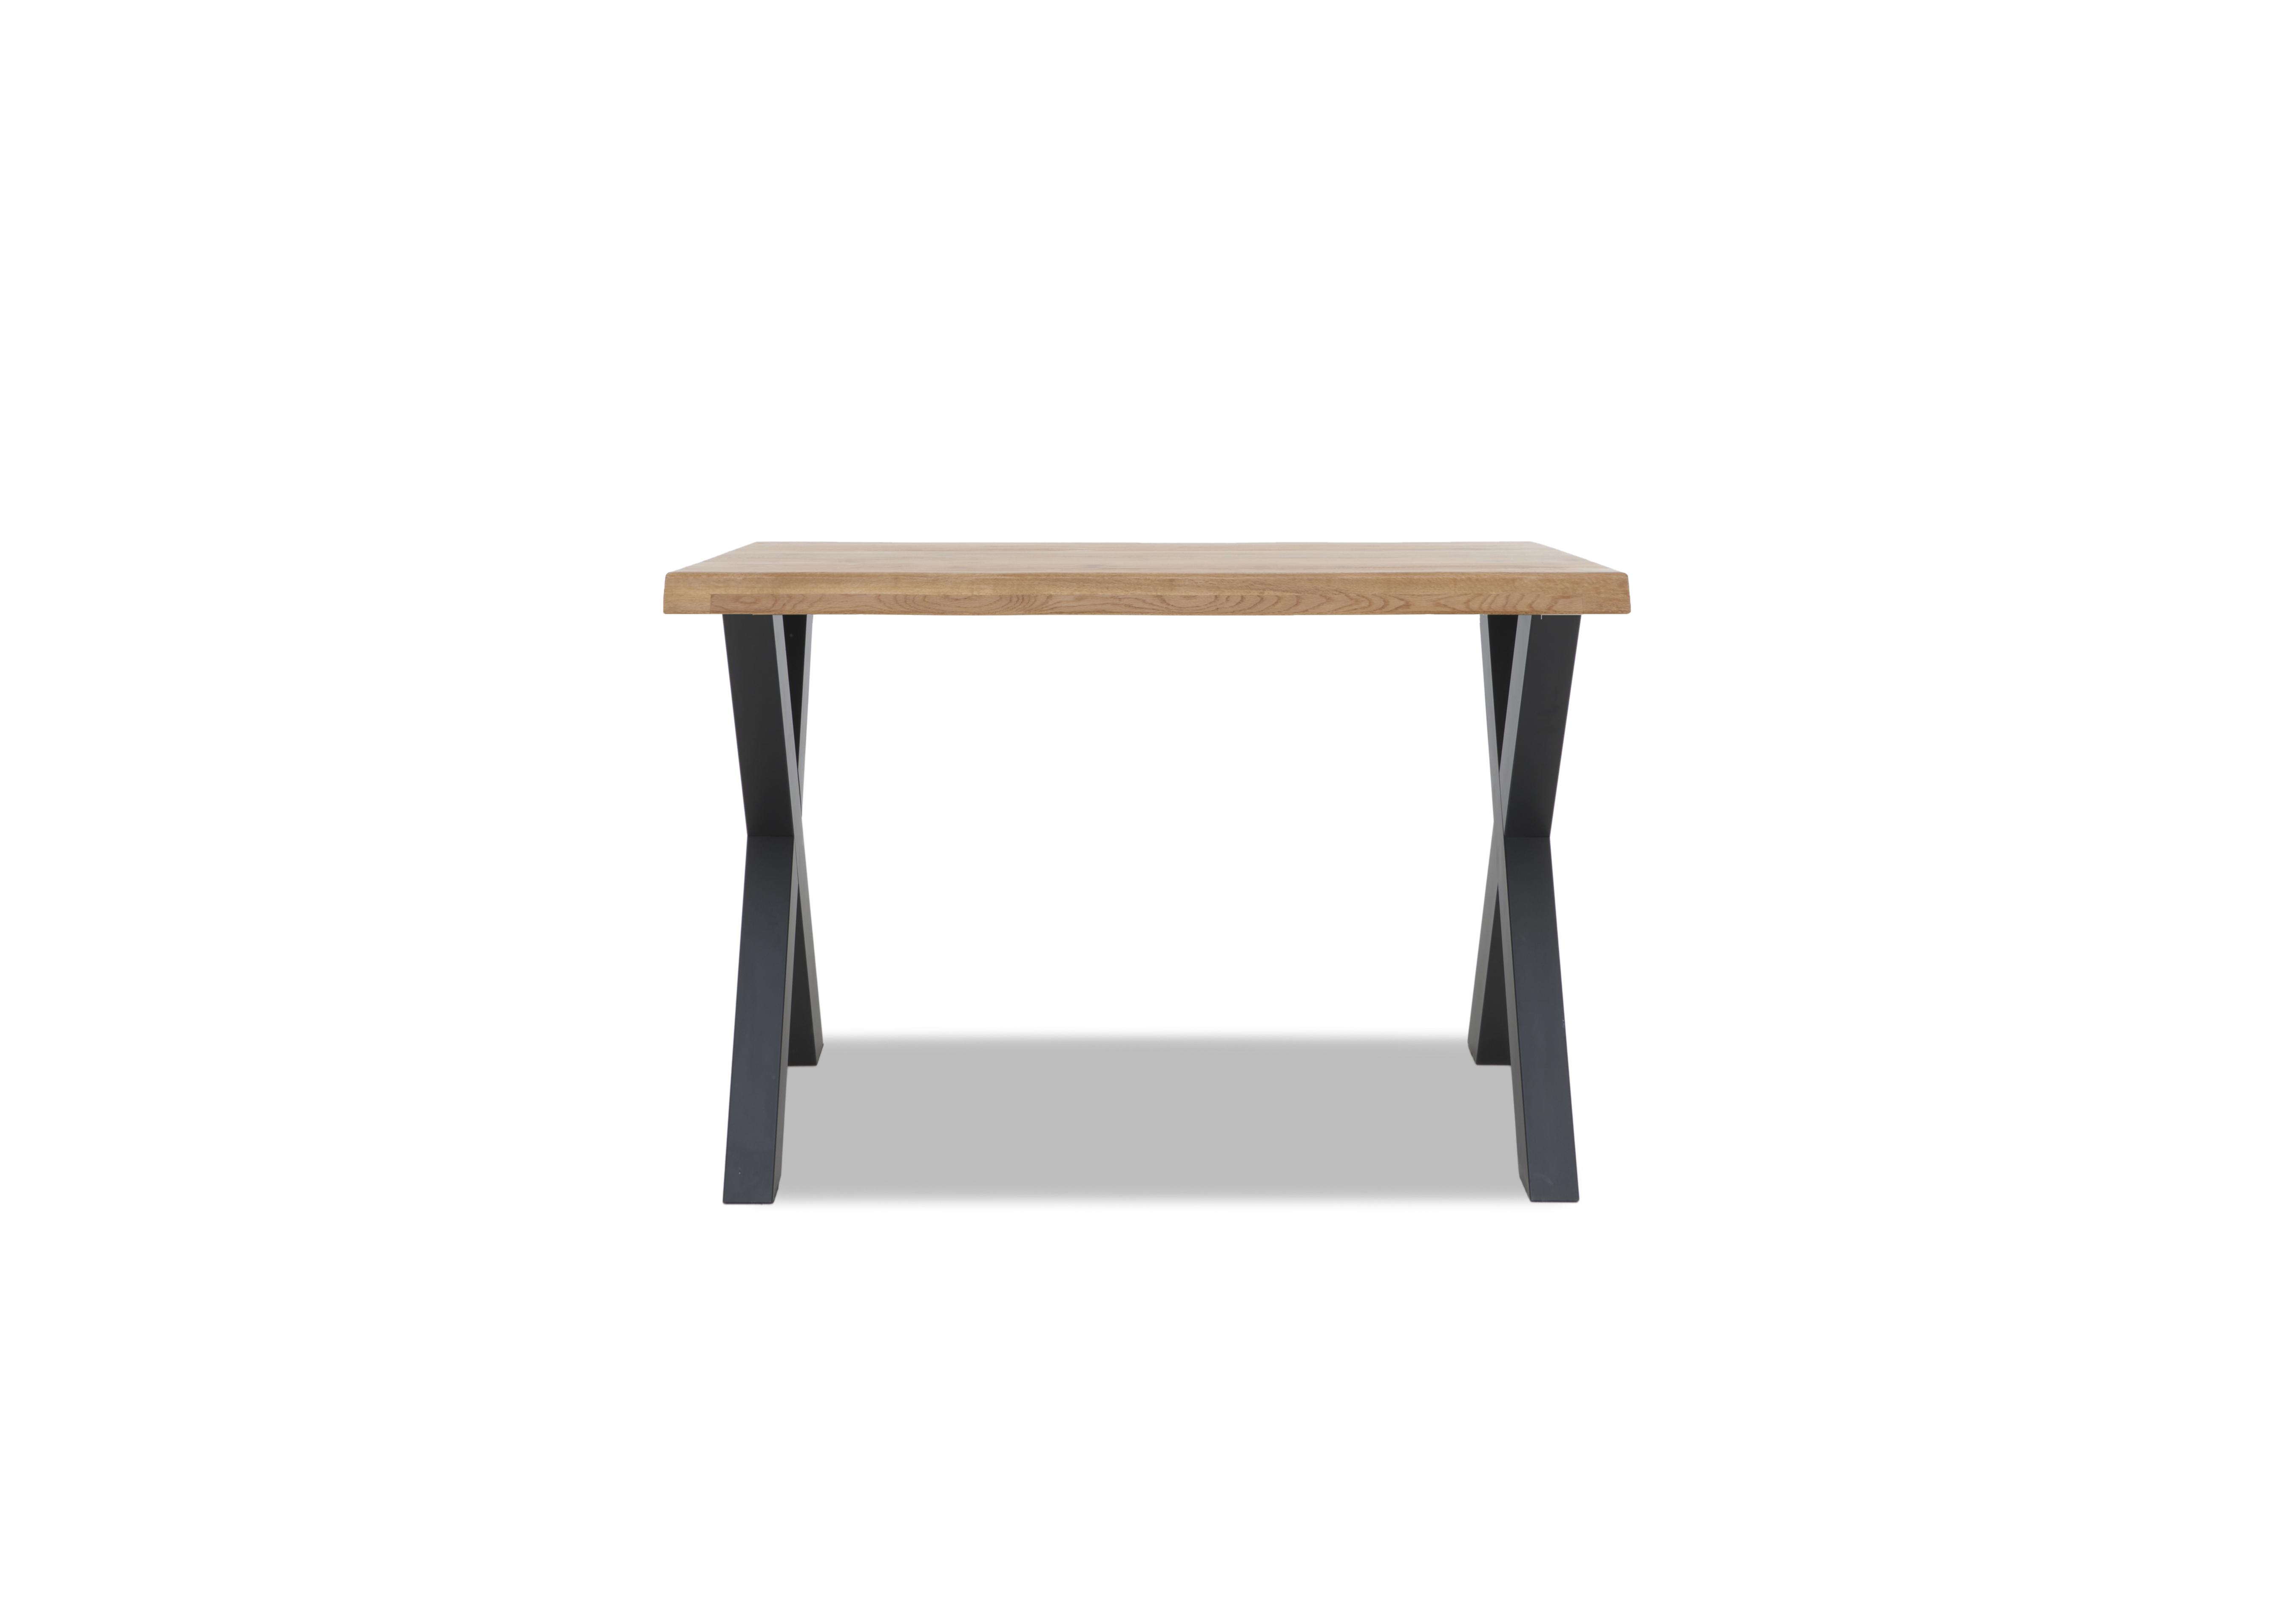 Compact Terra Raw Edge Bar Table with X-Shaped Legs in 01 Oiled on Furniture Village